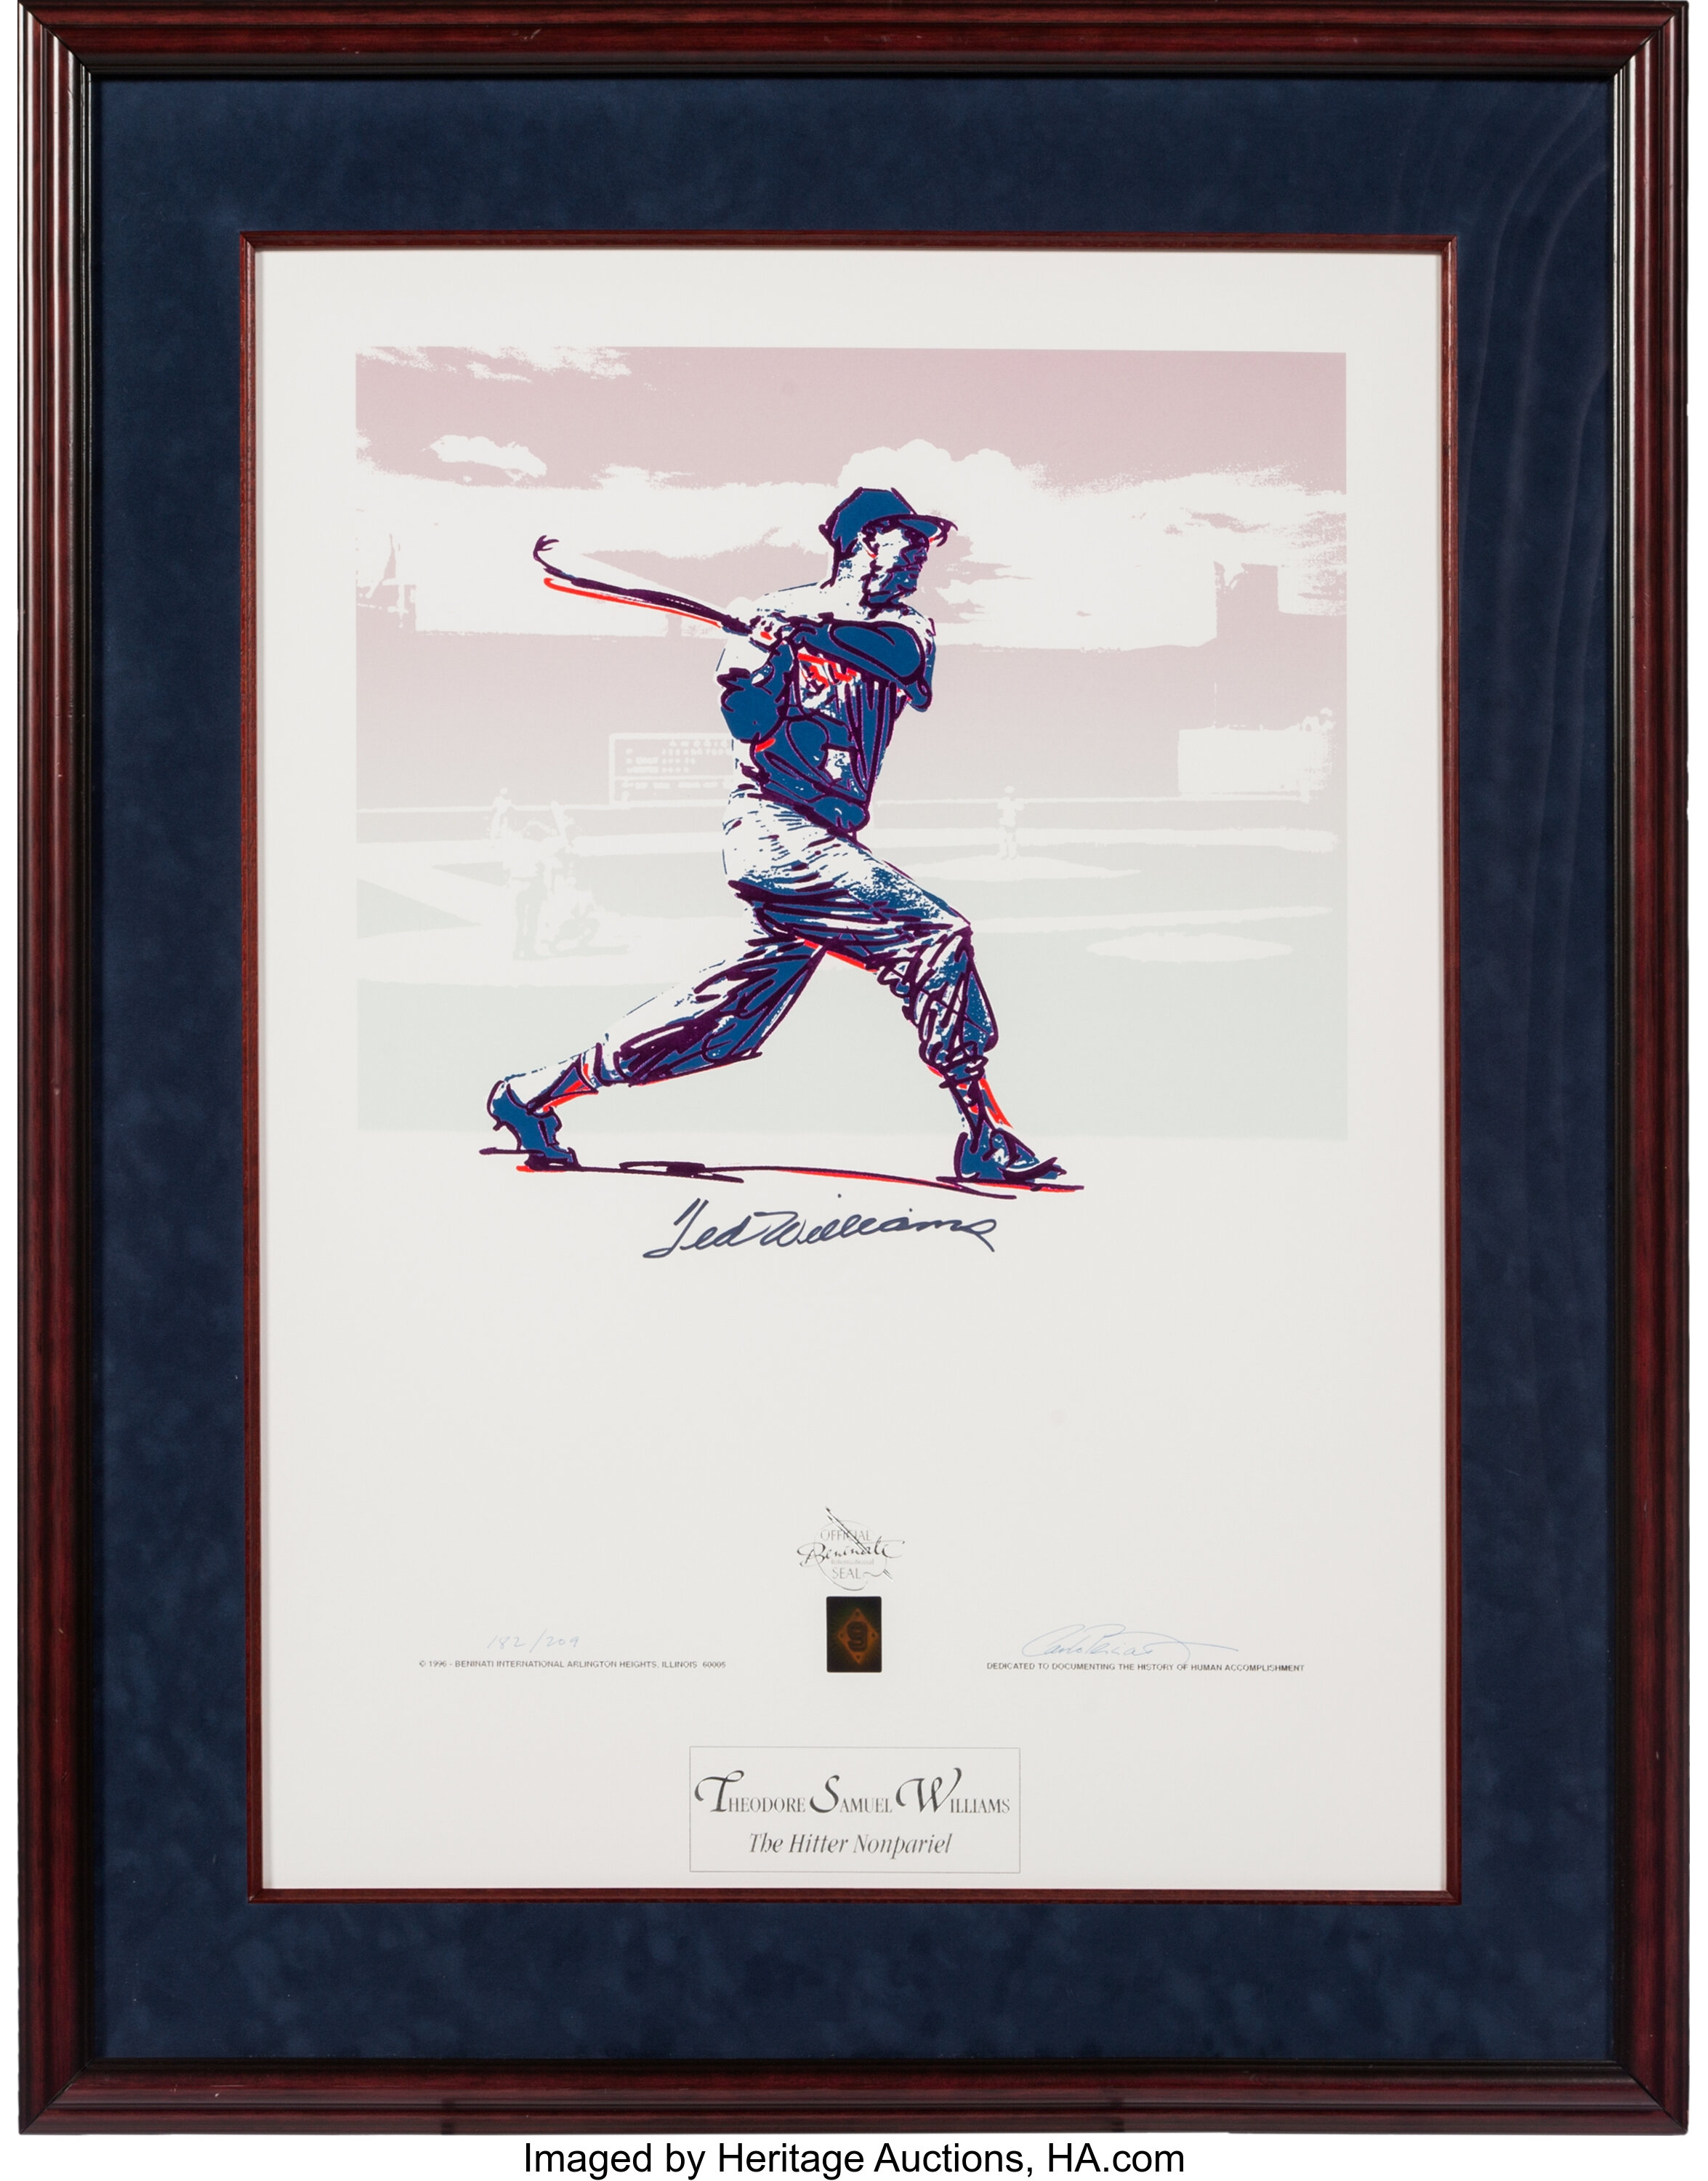 Sold at Auction: Authentic Ted Williams Autograph GREATEST HITTER!